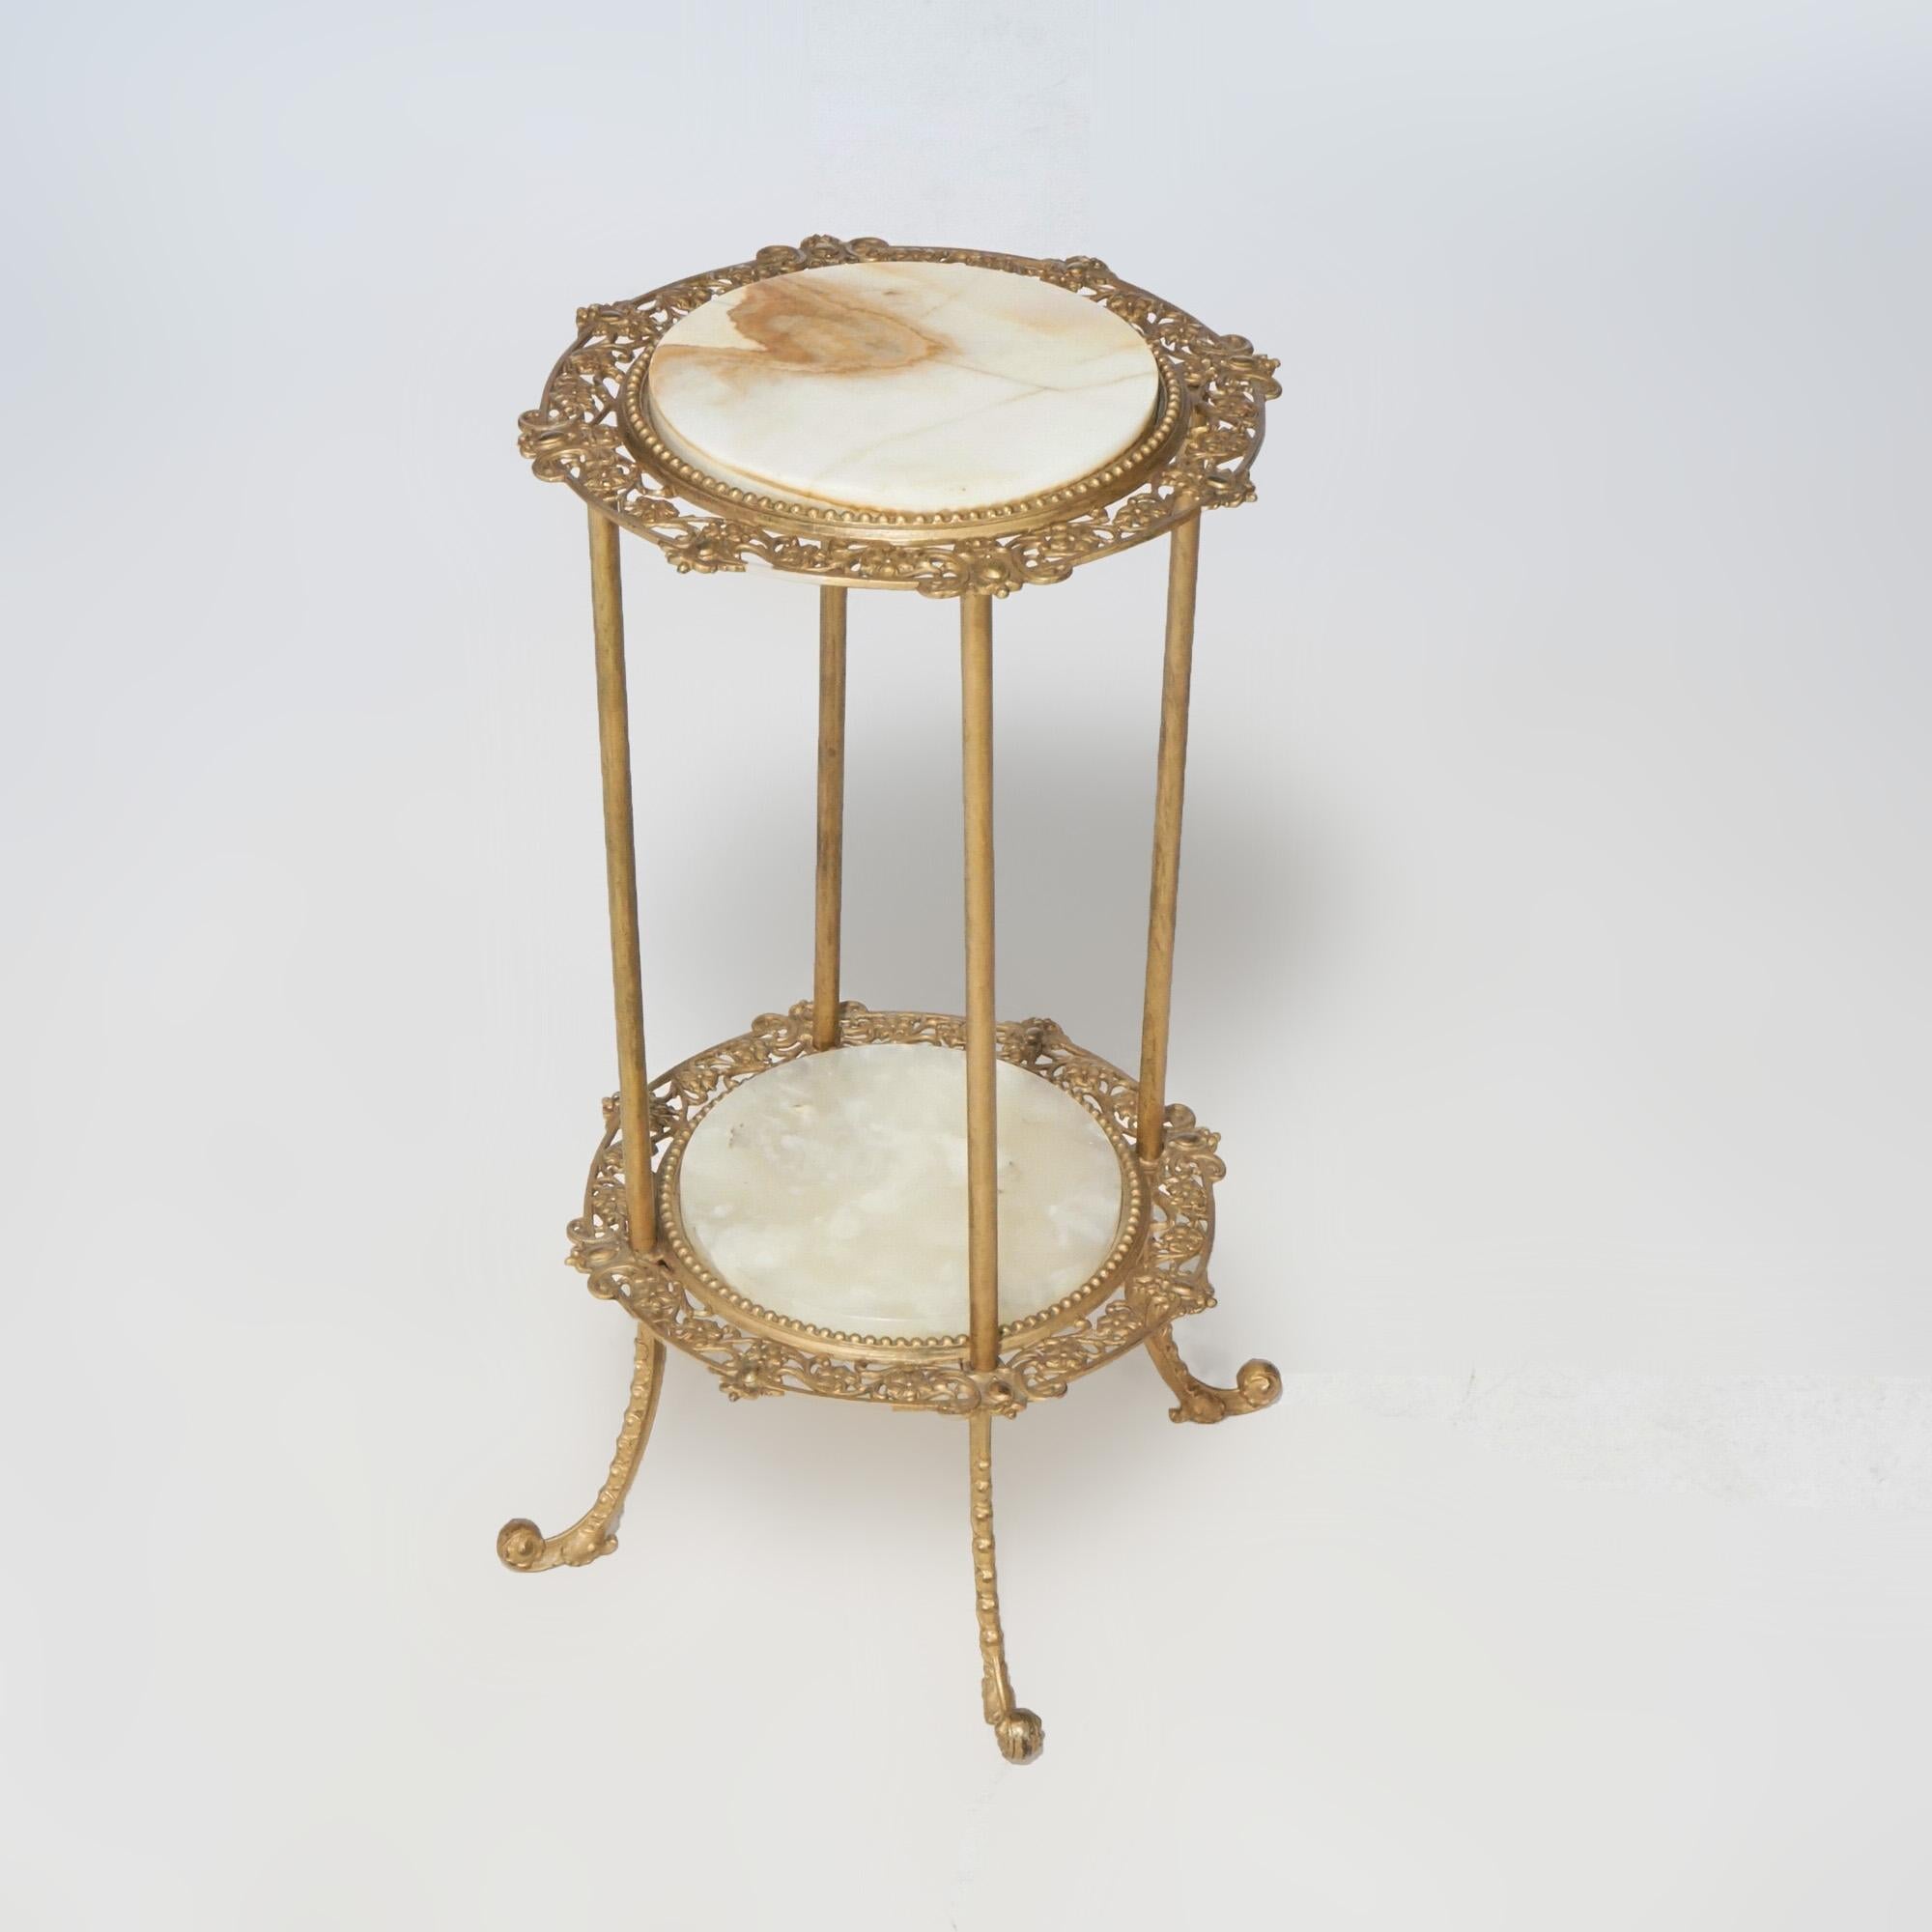 Antique Victorian Gilt Metal & Onyx Two Tiered Stand, circa 1890 For Sale 1